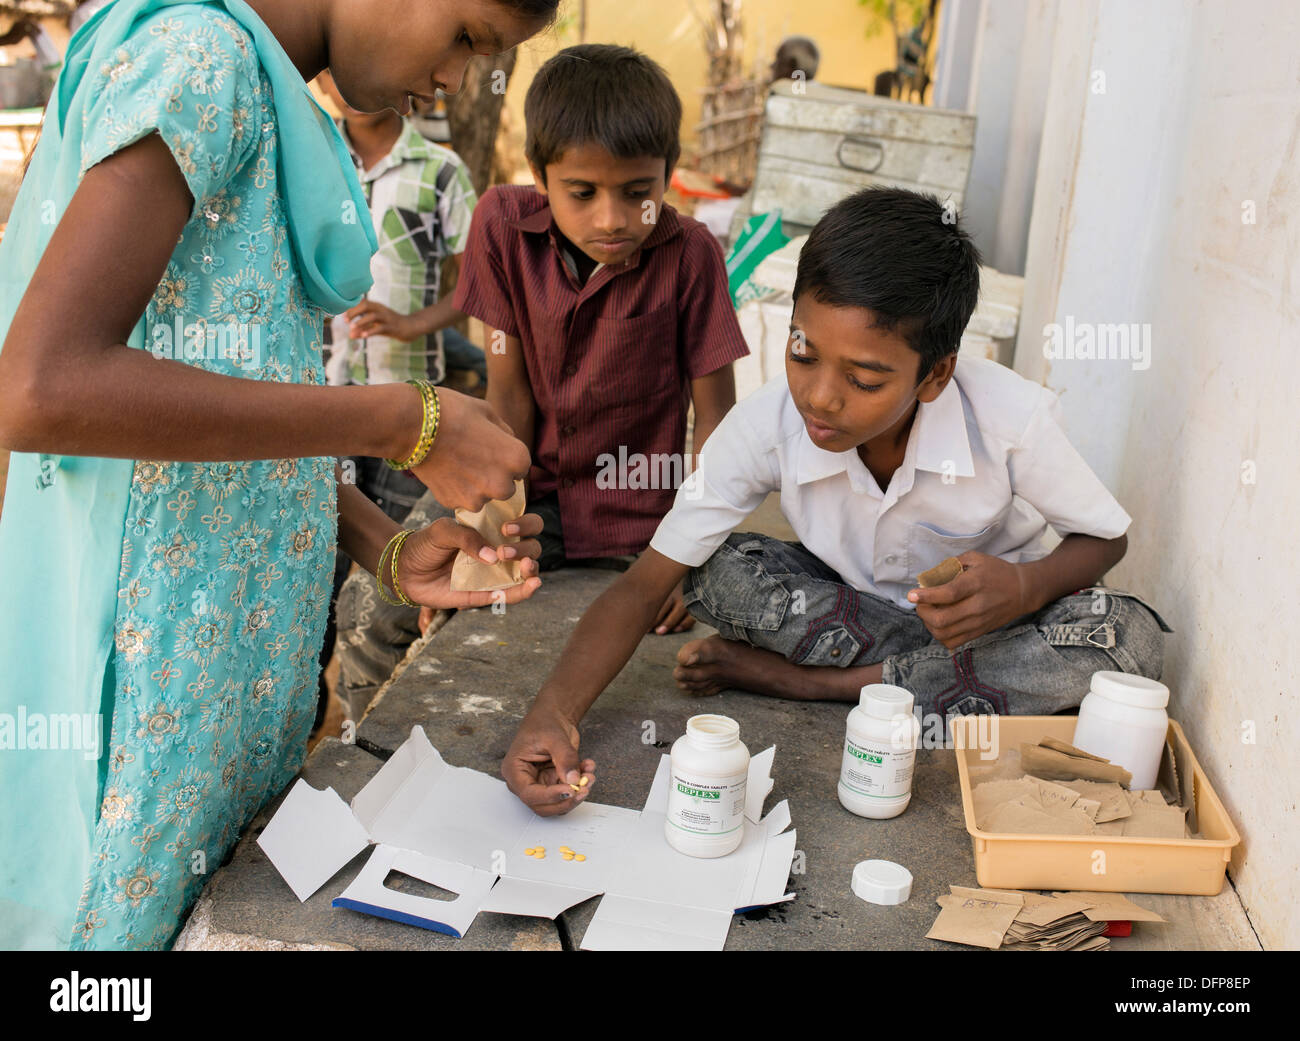 Indian children putting vitamin B tablets into packets at Sri Sathya Sai Baba mobile outreach hospital pharmacy. India Stock Photo